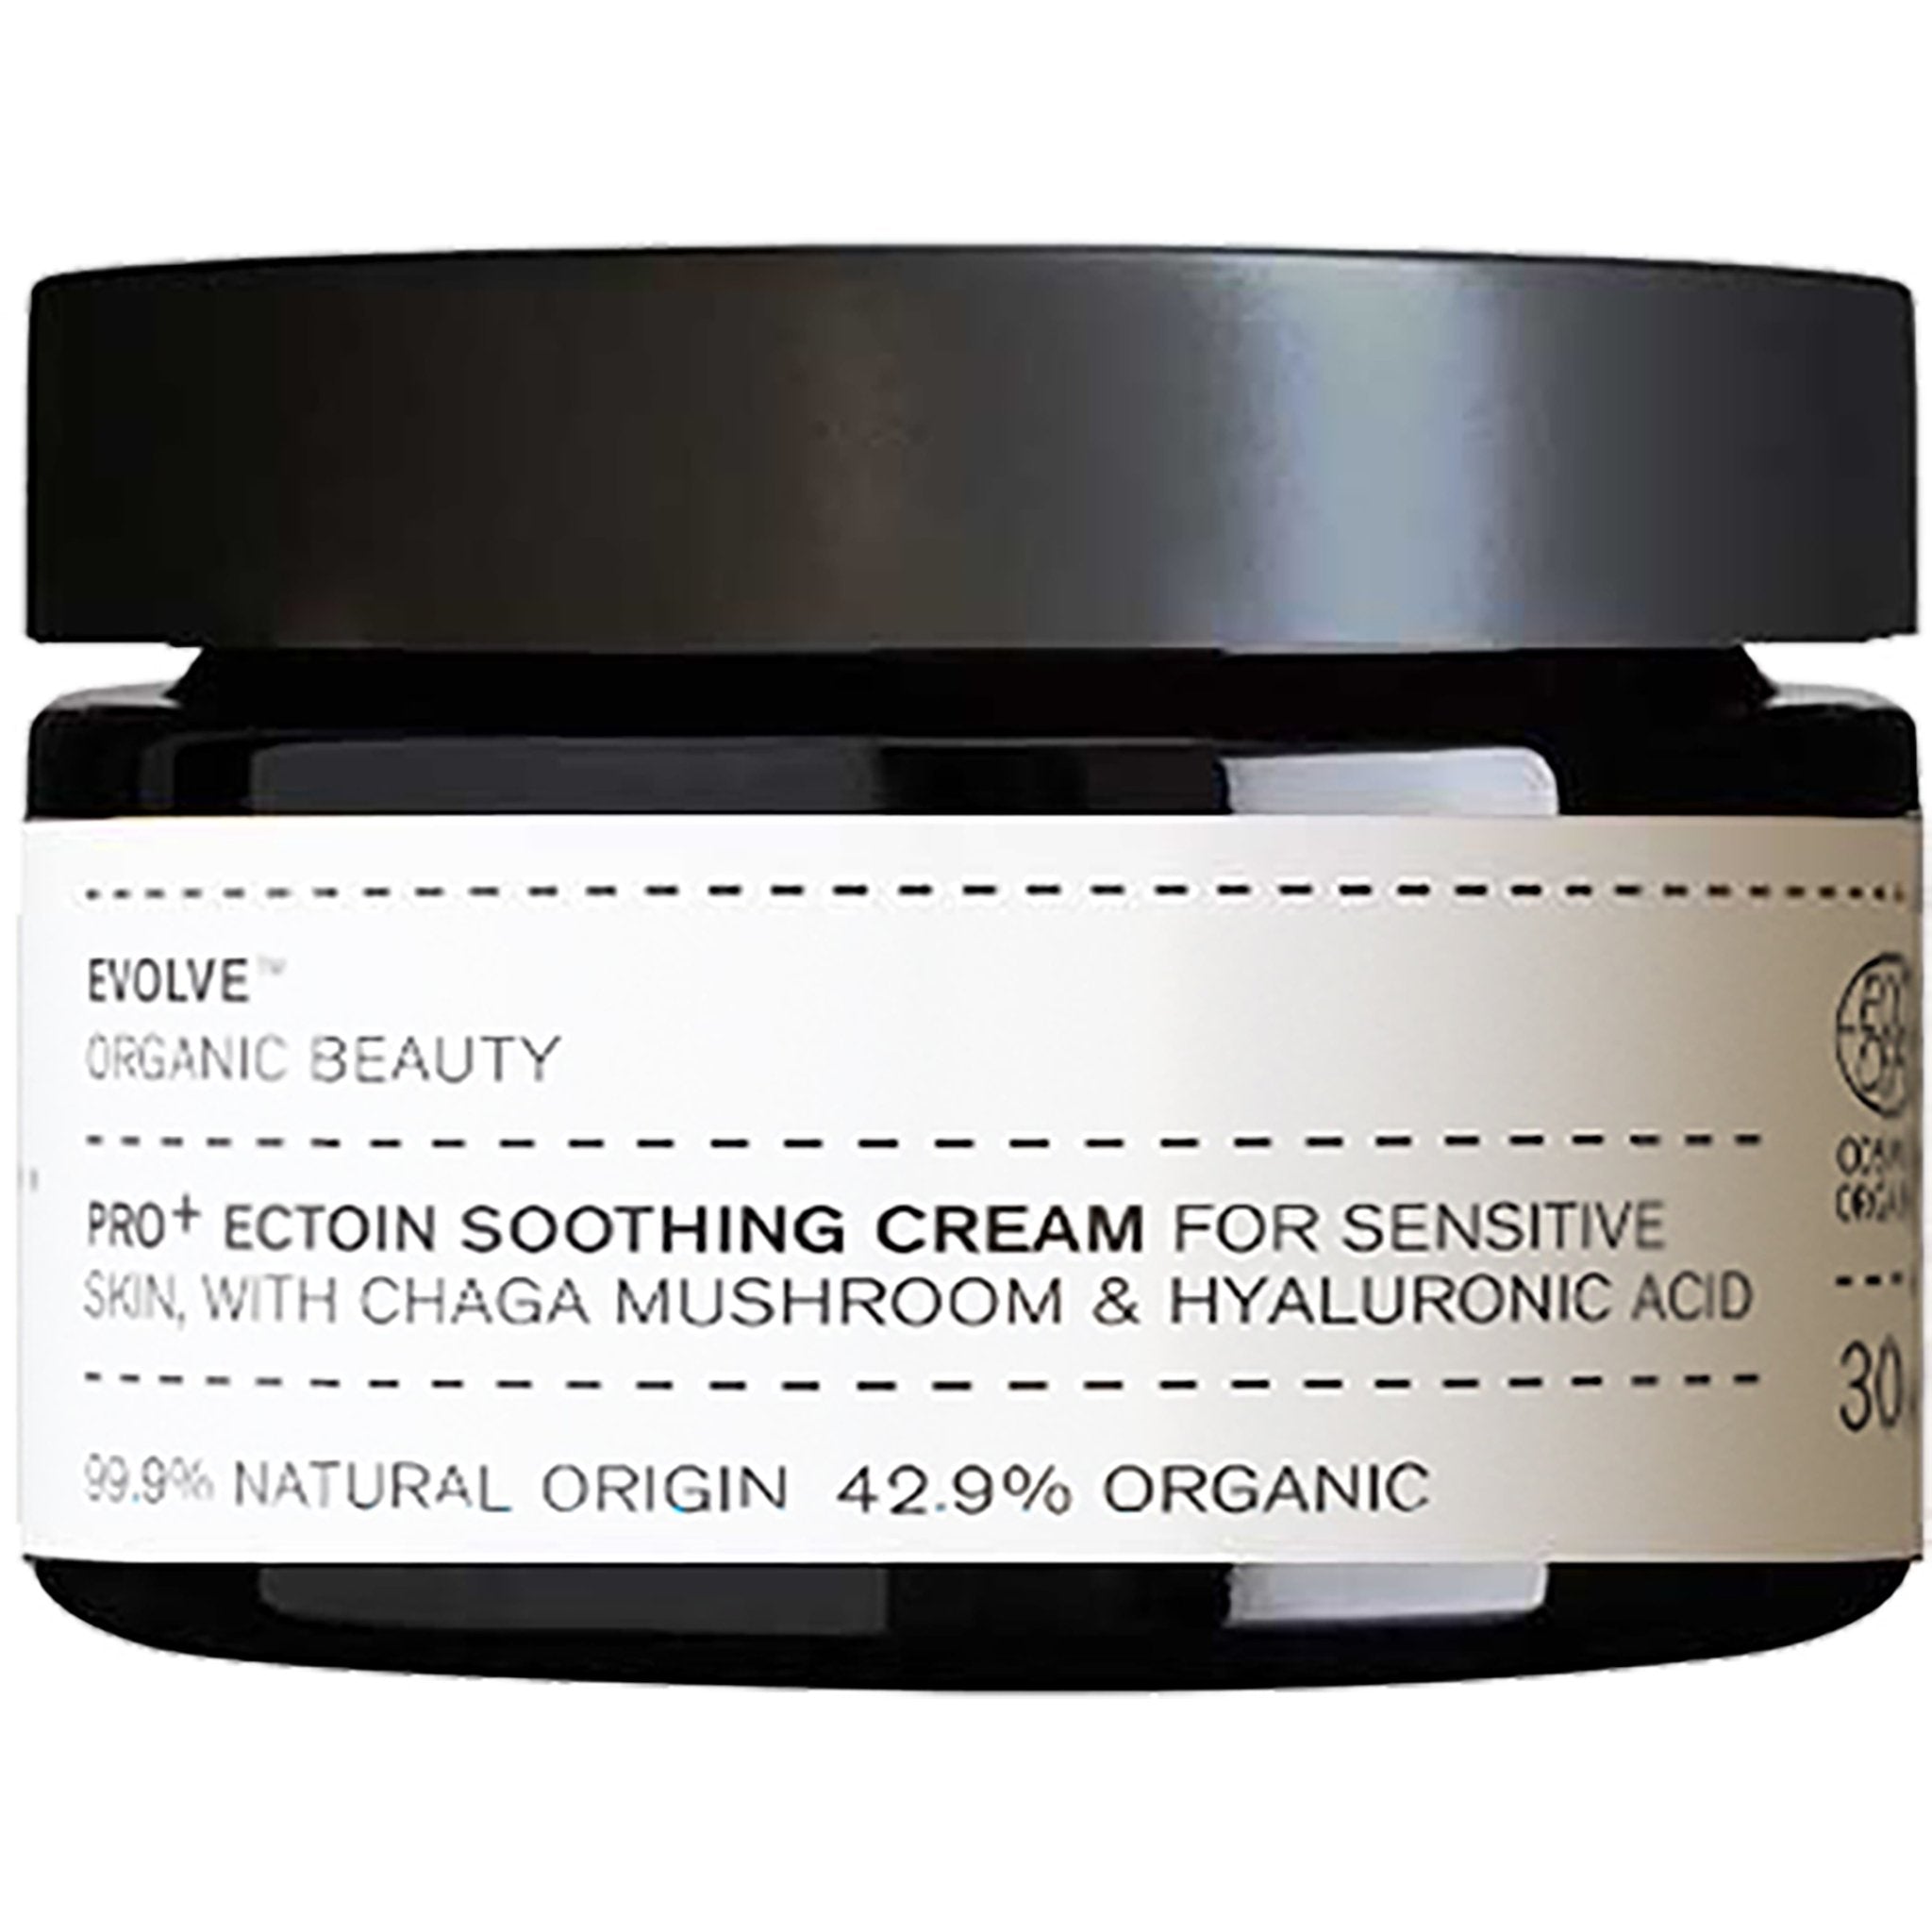 Pro+ Ecton Soothing Cream